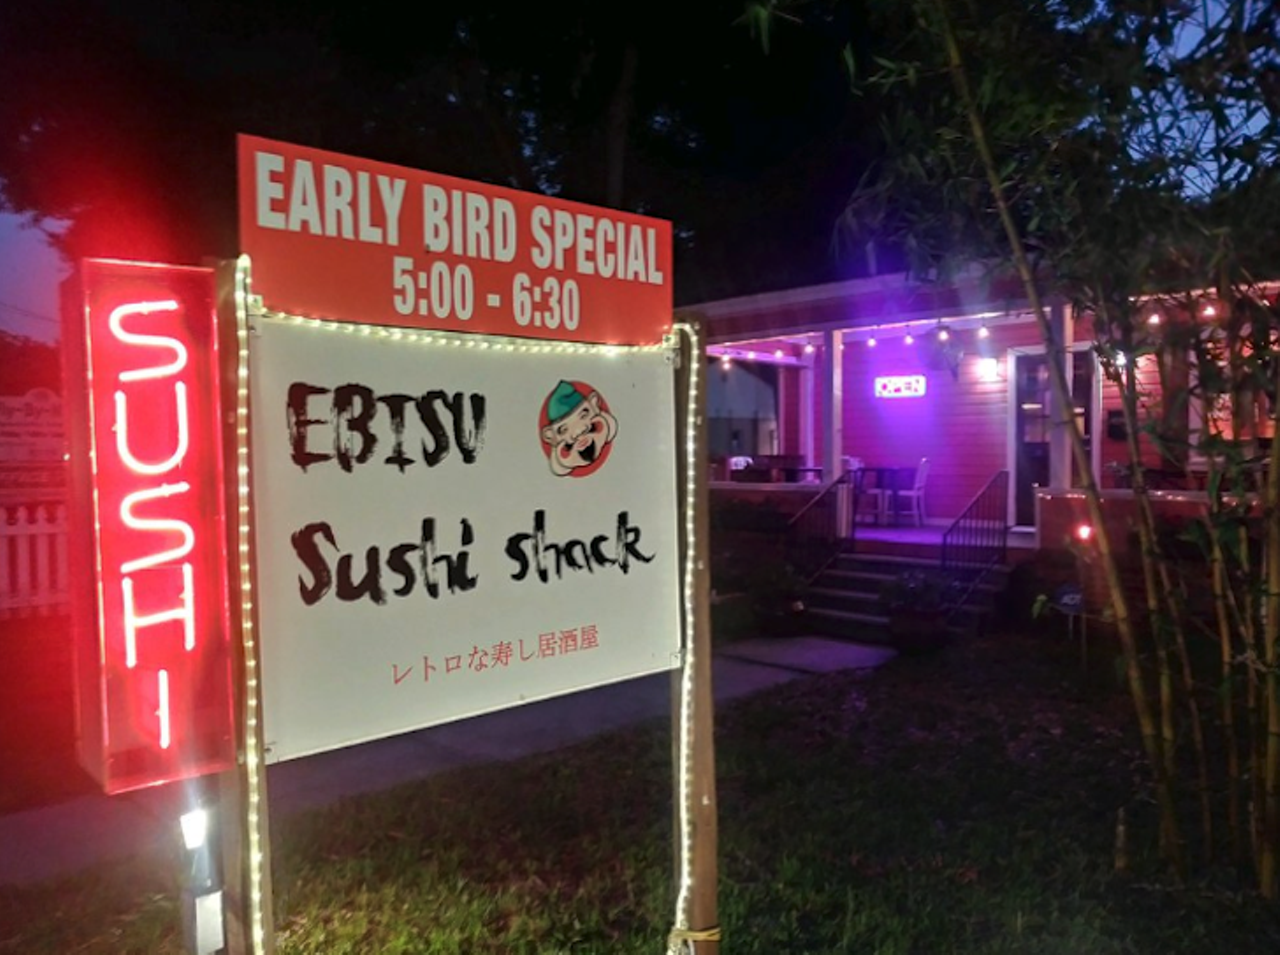 Ebisu Sushi Shack  
5116 N Nebraska Ave, Tampa, 813-252-6393
An actual shack, this tiny sushi joint serves up some of the best rolls in Tampa Bay. Go for a low key date, or just to get your sushi fix. 
Photo via Ebisu Sushi Shack/ Facebook